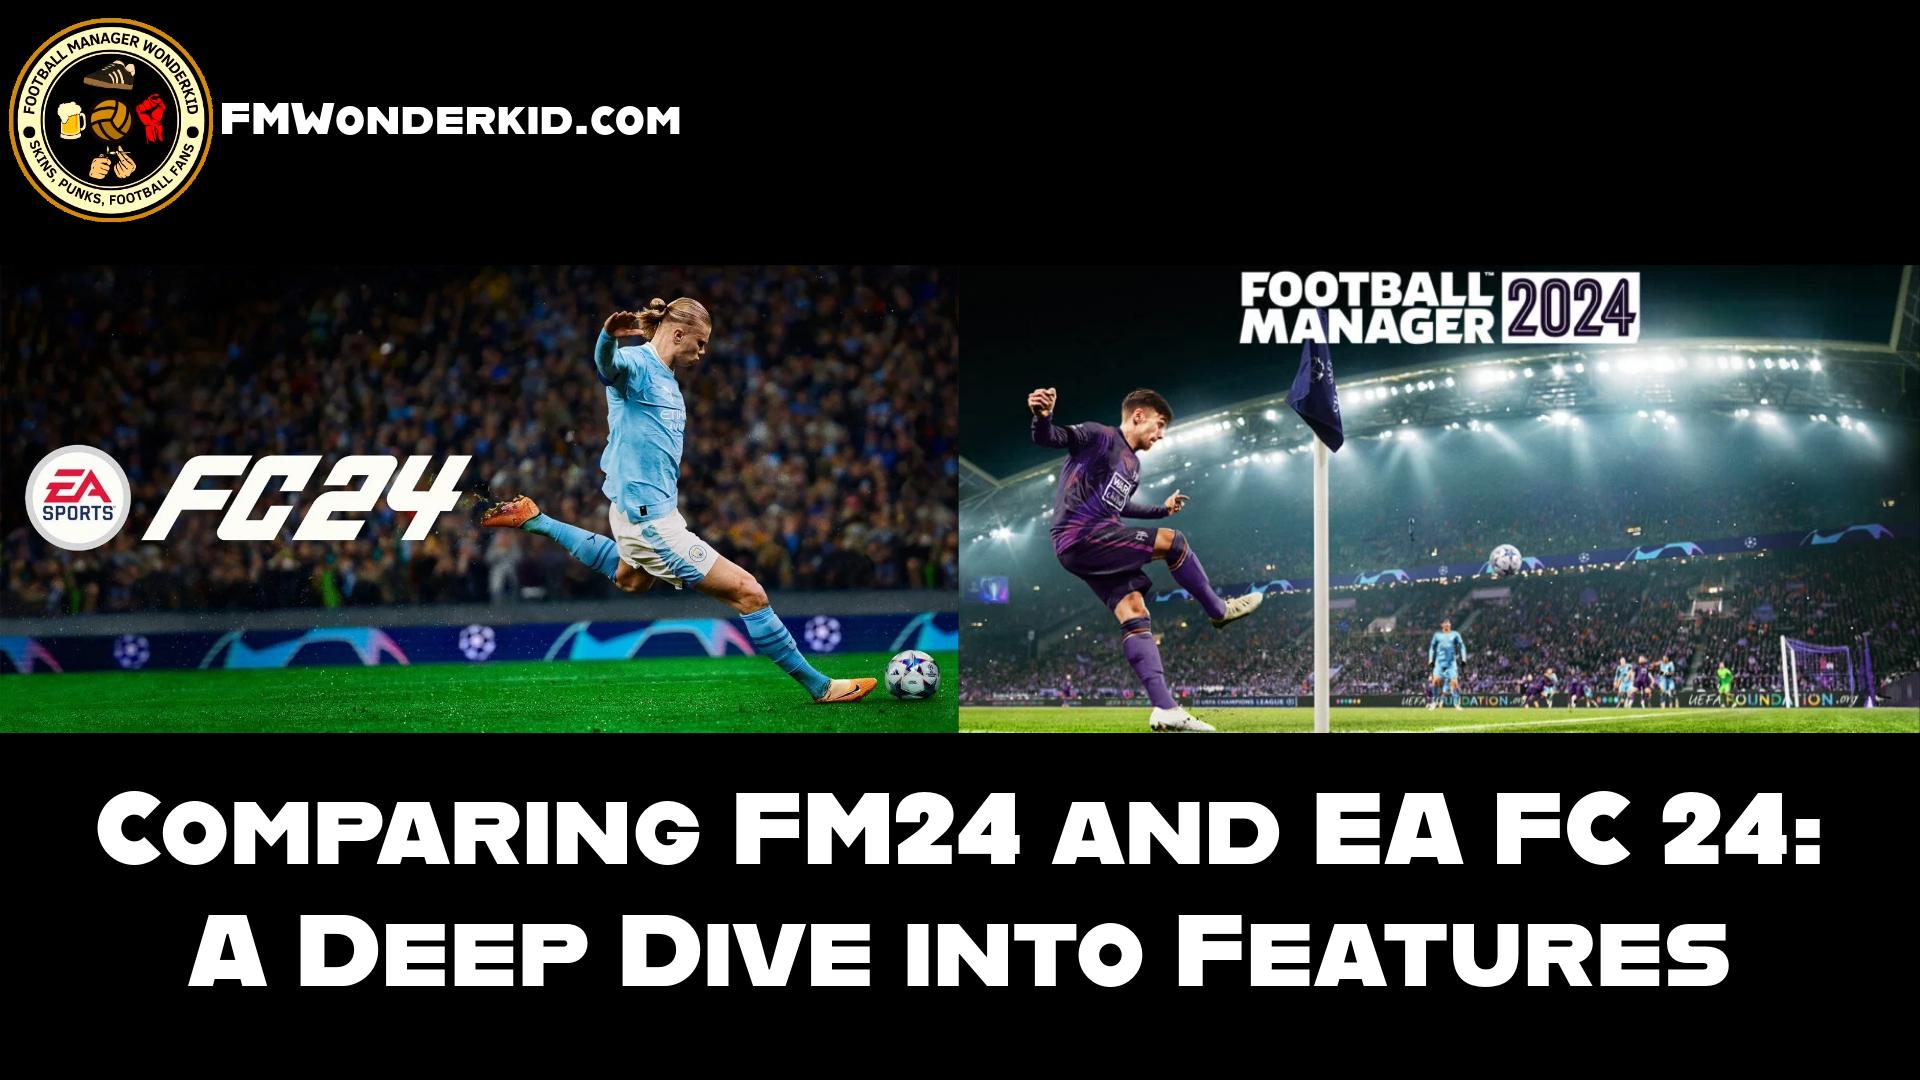 Breaking Down FM24 vs EA FC 24: A Feature-by-Feature Analysis